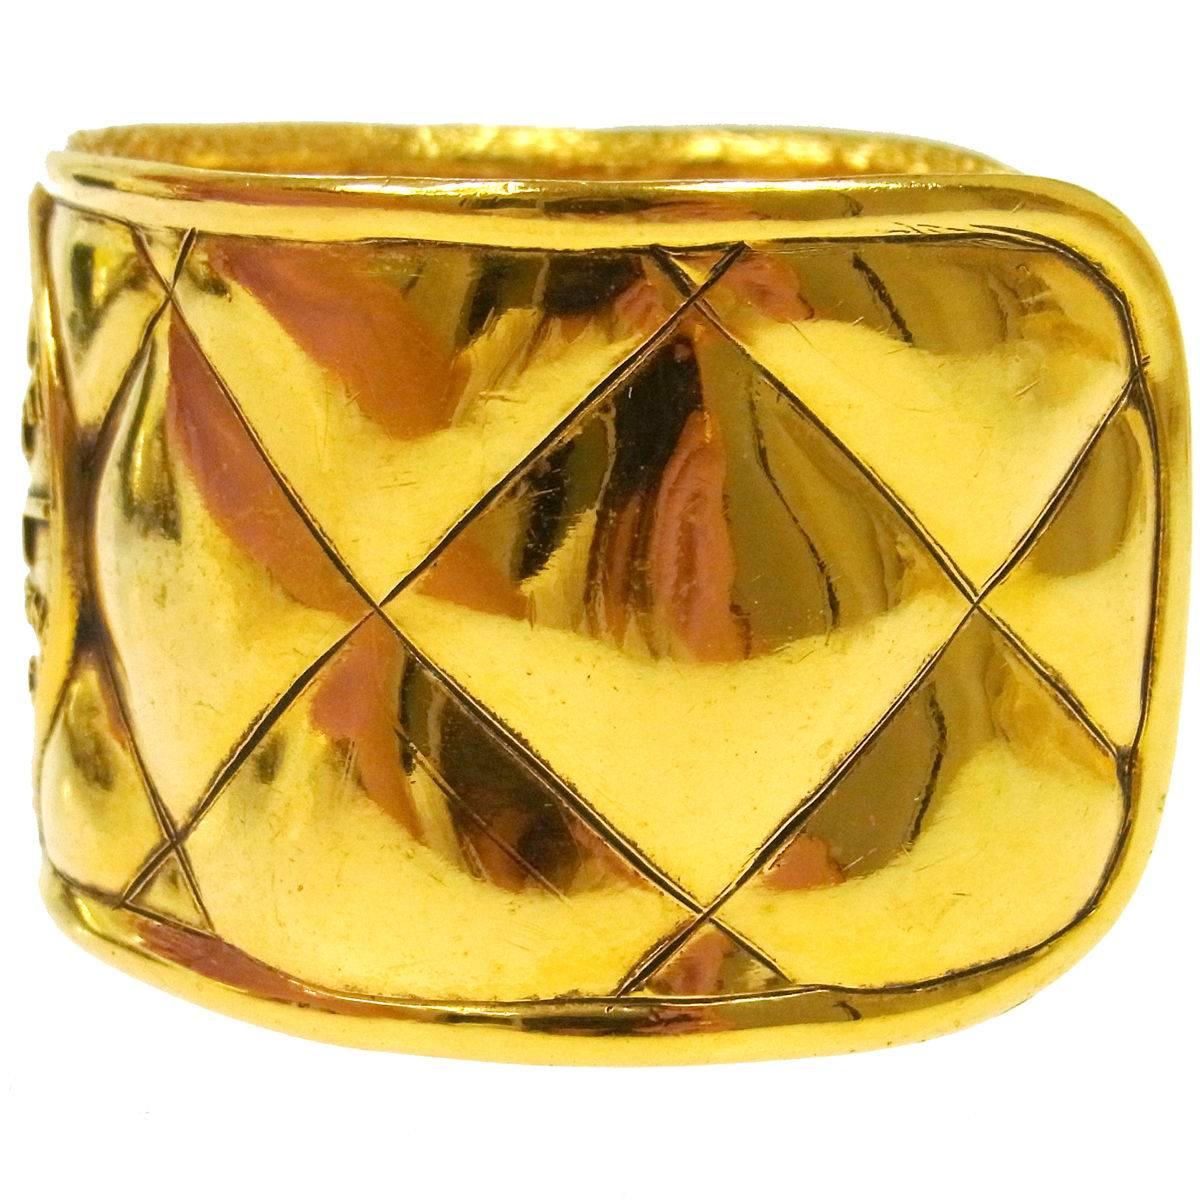 CURATOR'S NOTES

Metal
Gold tone
Slip on closure
Made in France
Width 1.5"
Inner circumference ~7"

Shop Newfound Luxury for authentic vintage Chanel cuff bracelets.